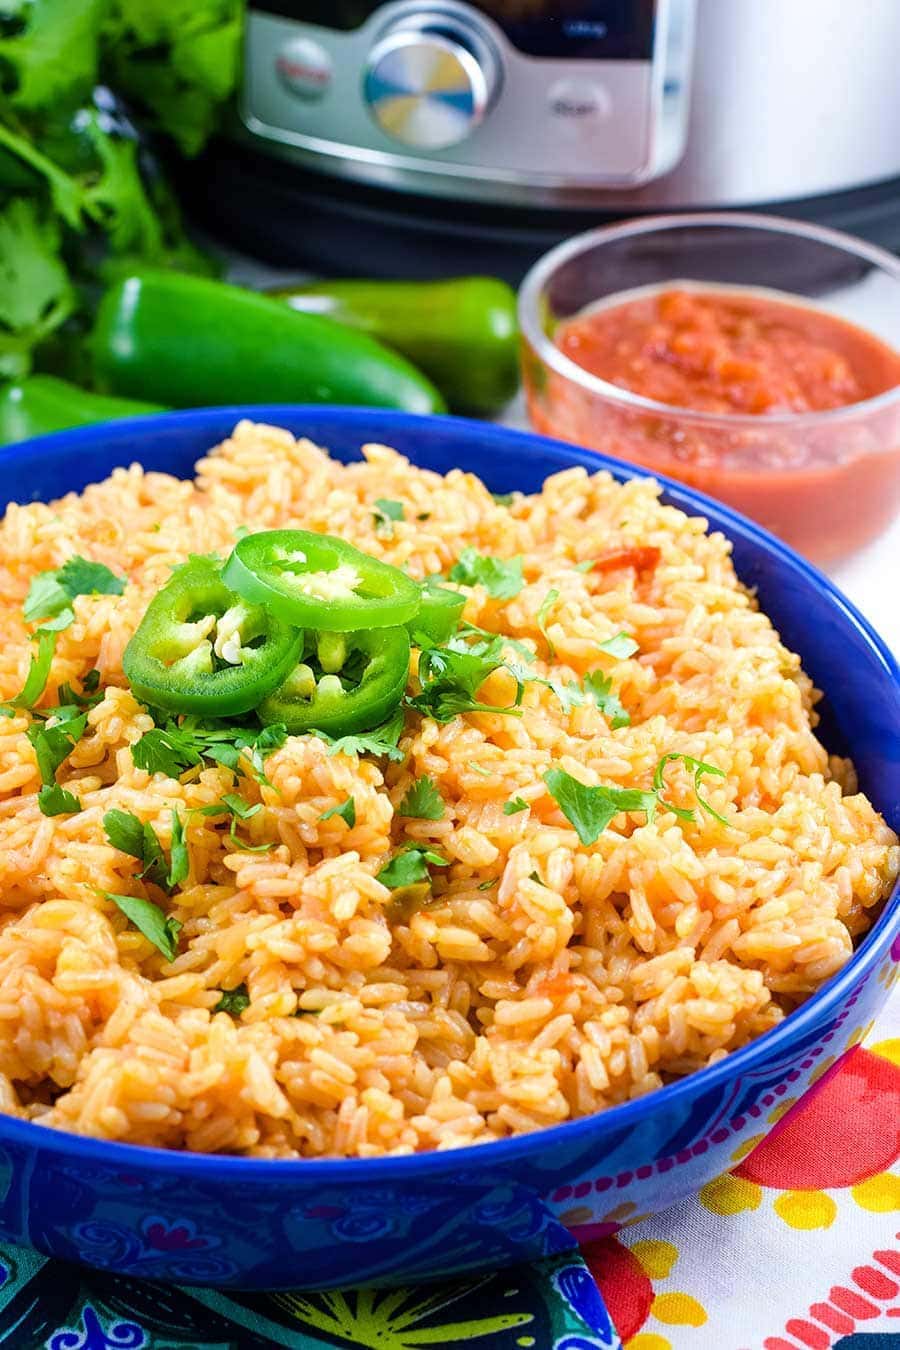 https://www.soulfullymade.com/wp-content/uploads/2017/04/Easy-Instant-Pot-Mexican-Rice.jpg